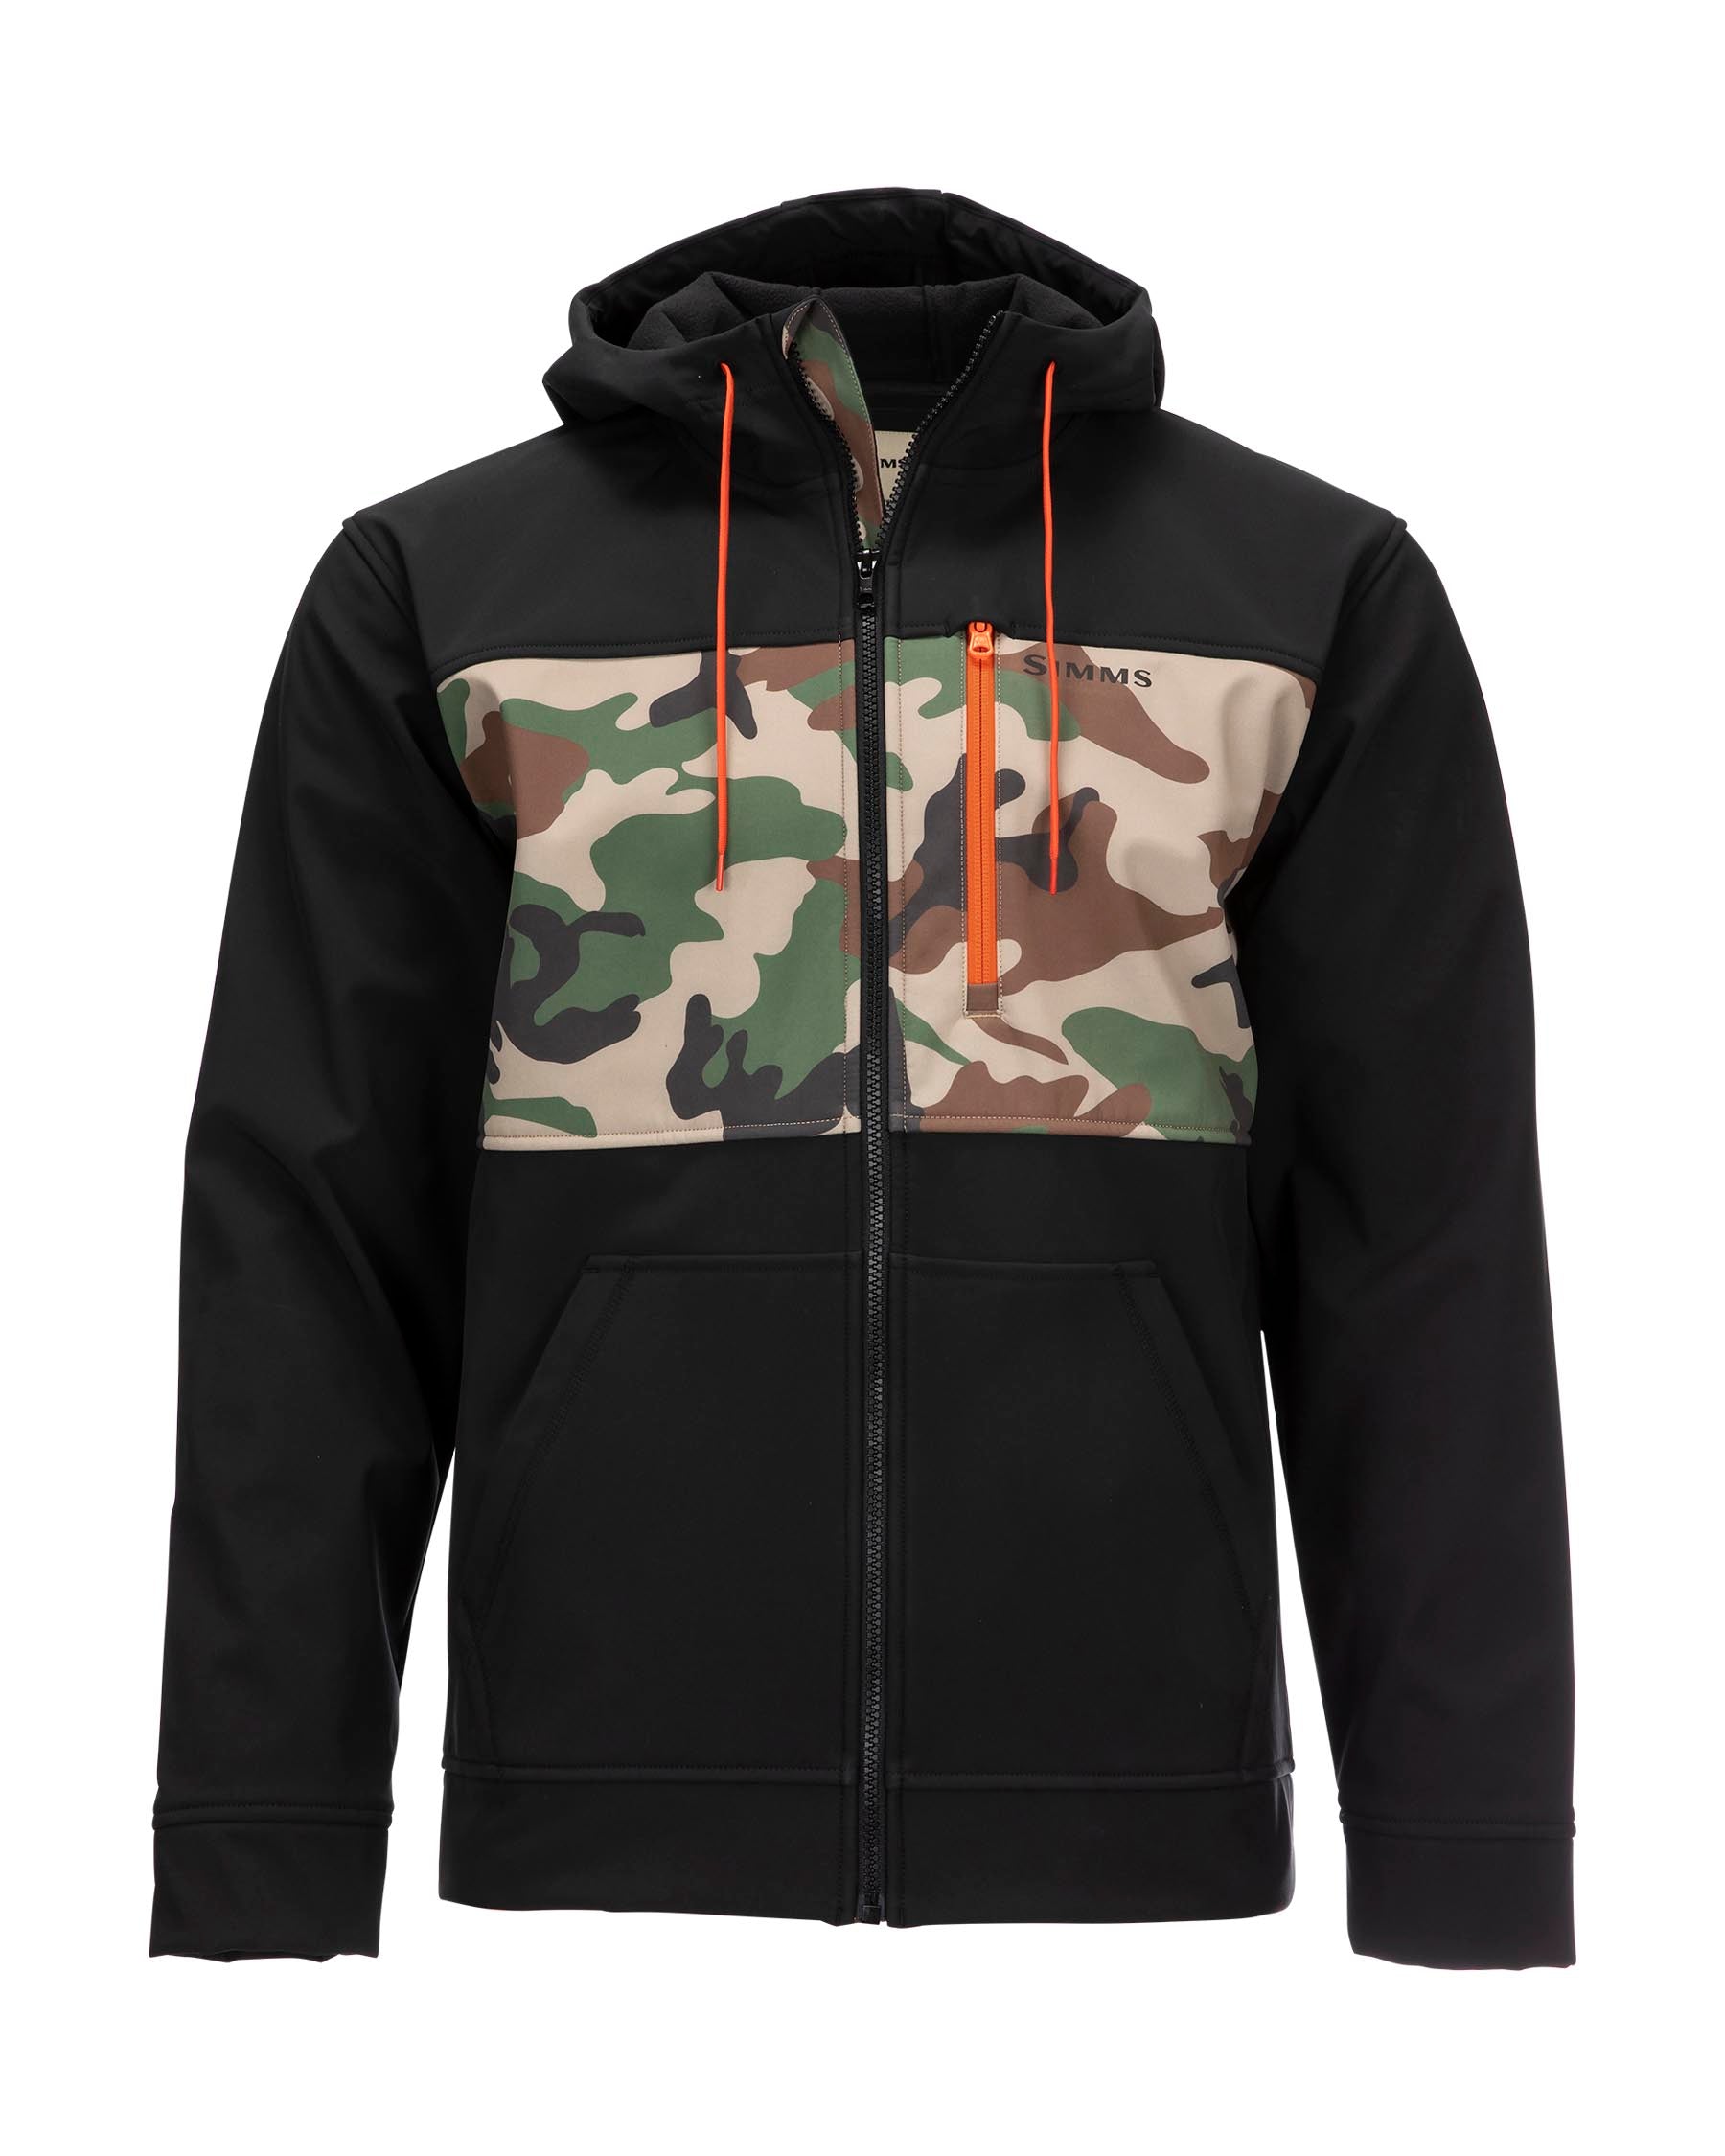 Get a FREE Simms Men's Rogue Hoody with Today's Deal! - Fish USA